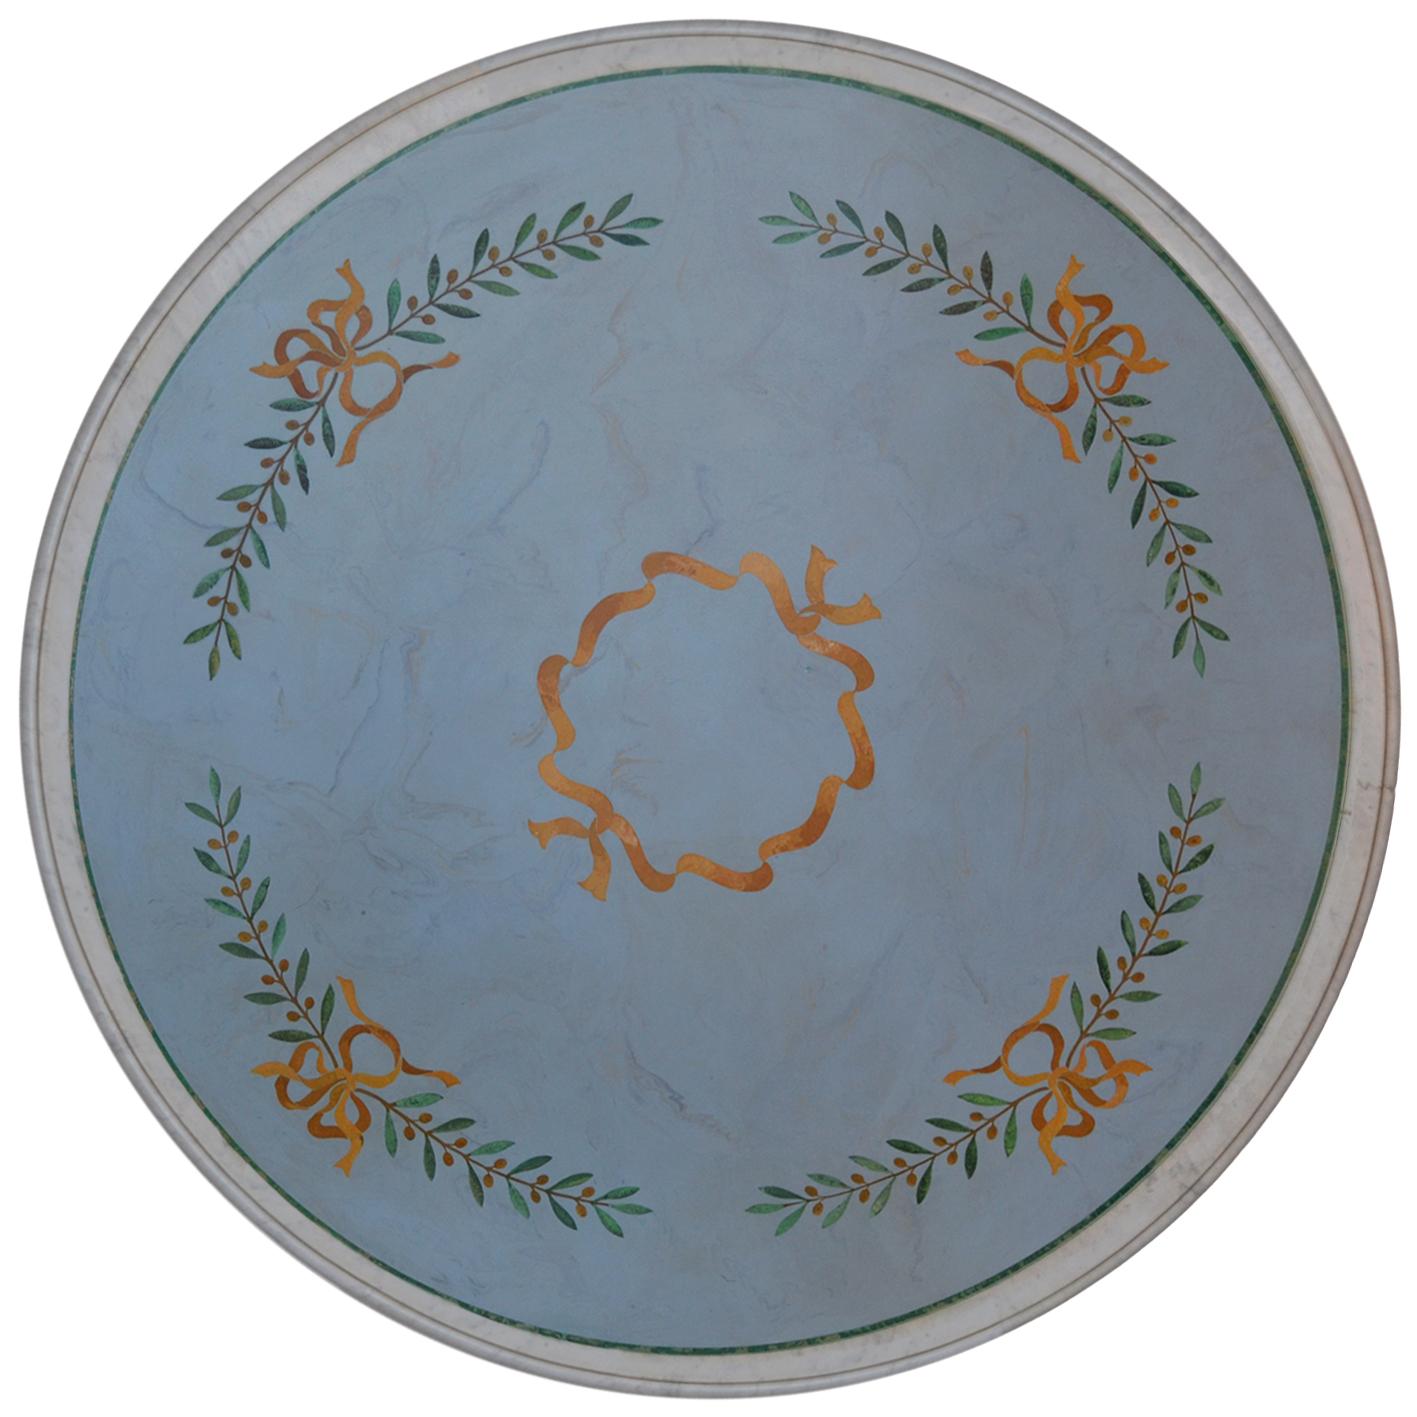 Adam style round dining or center table manufactured by hand in our laboratory of artists.
The round table top crafted in white carrara marble, displays a refined  scagliola inlay decoration  of green  olive branches joined by  gold yellow  ribbons